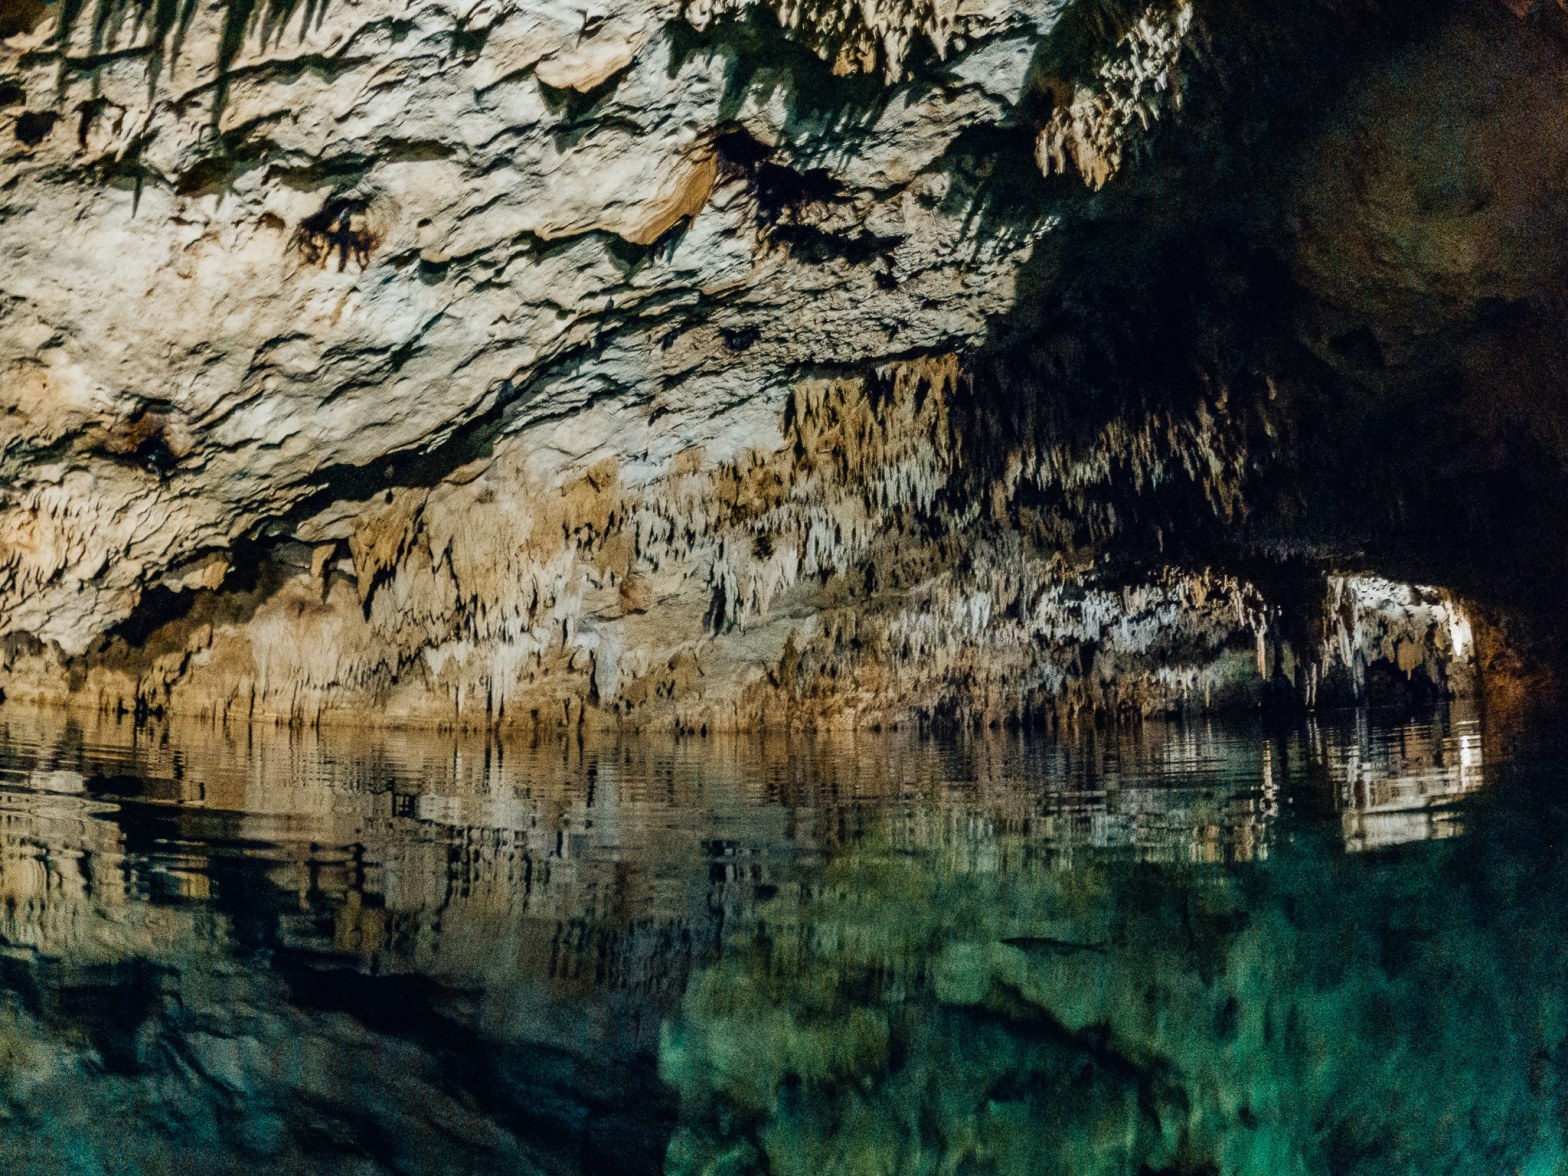 First person view of someone swimming through a cave cenote with stalactites hanging from the ceiling